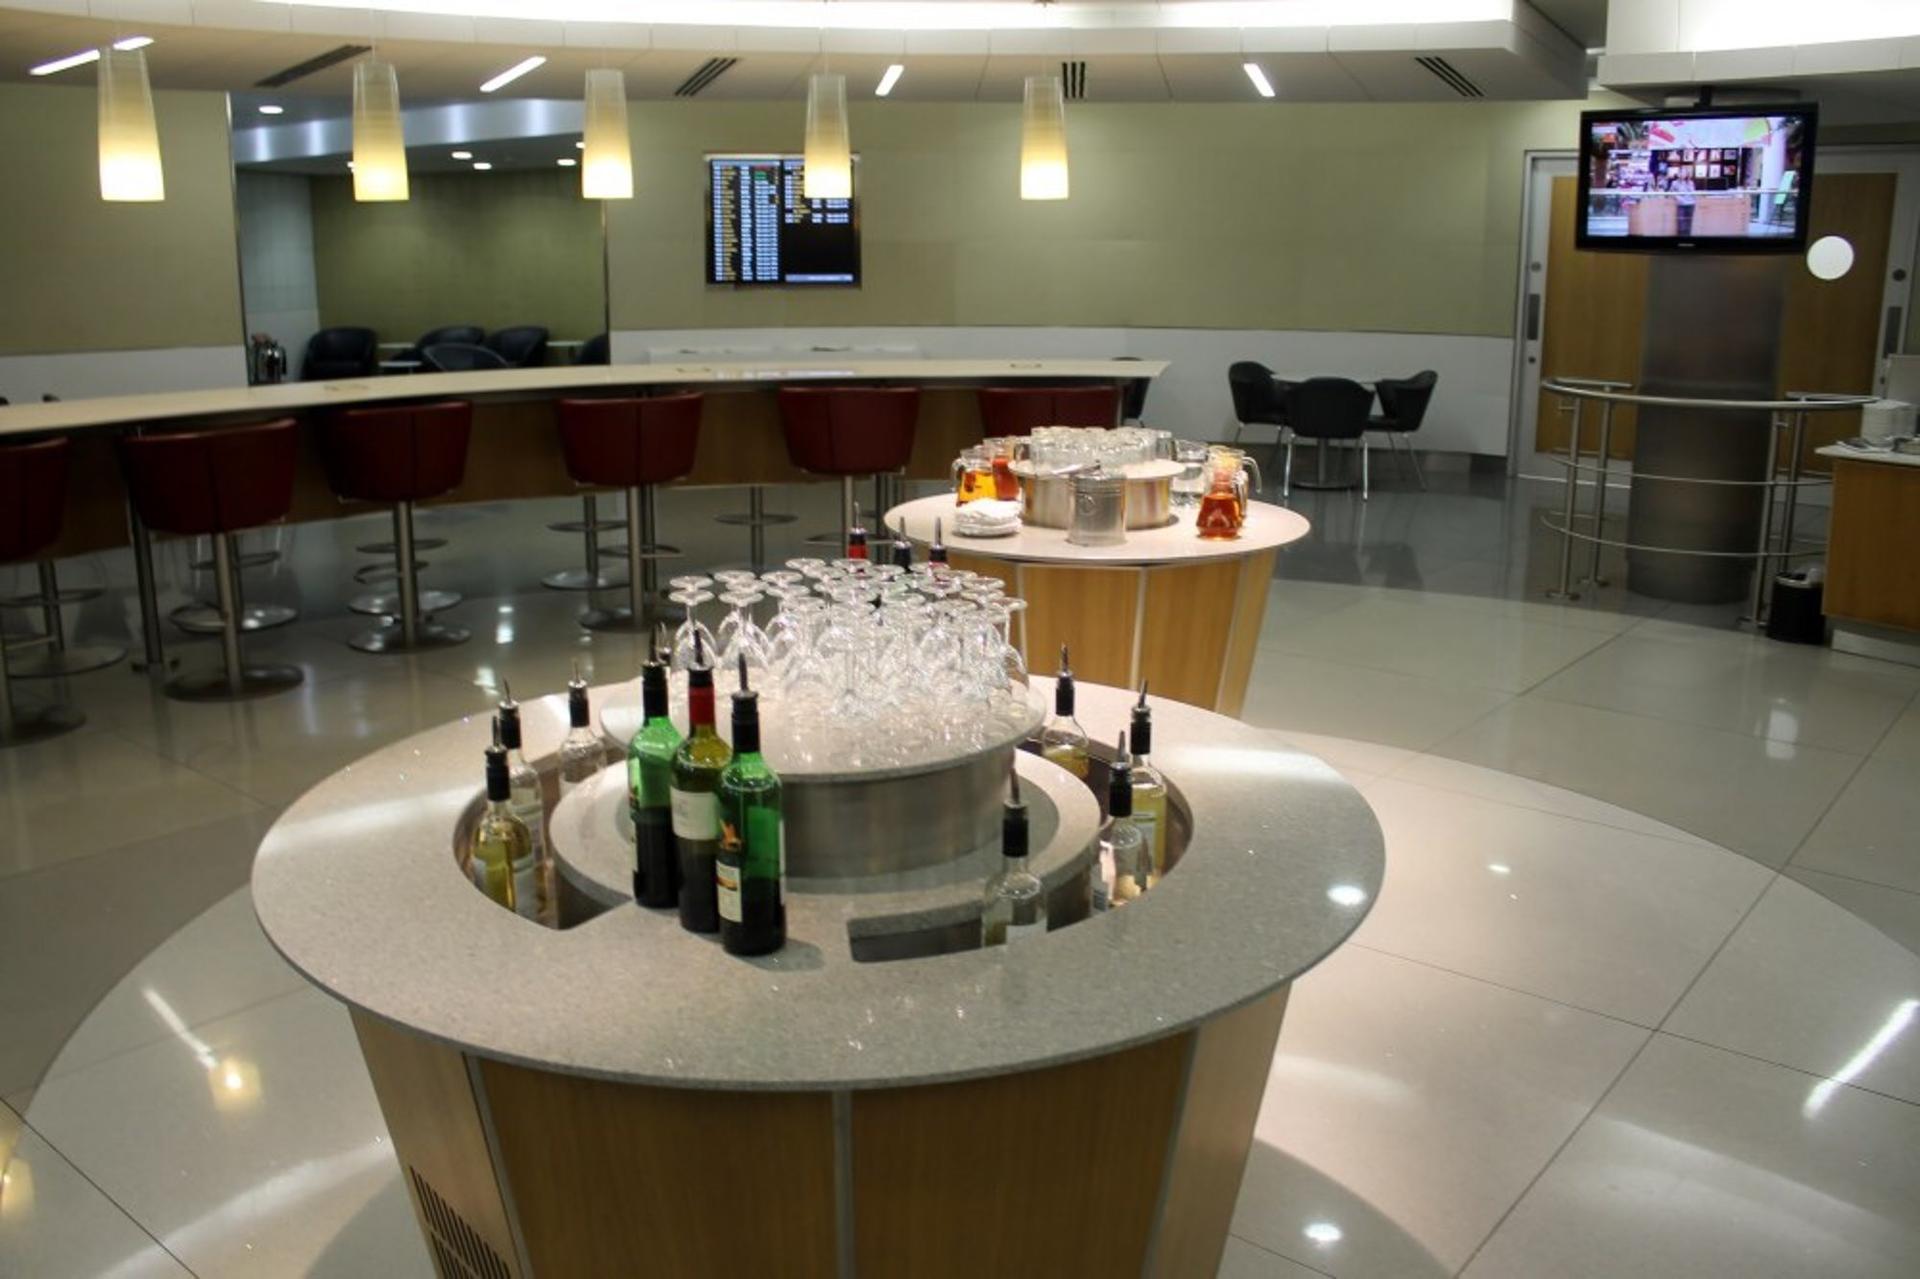 American Airlines Admirals Club image 28 of 38